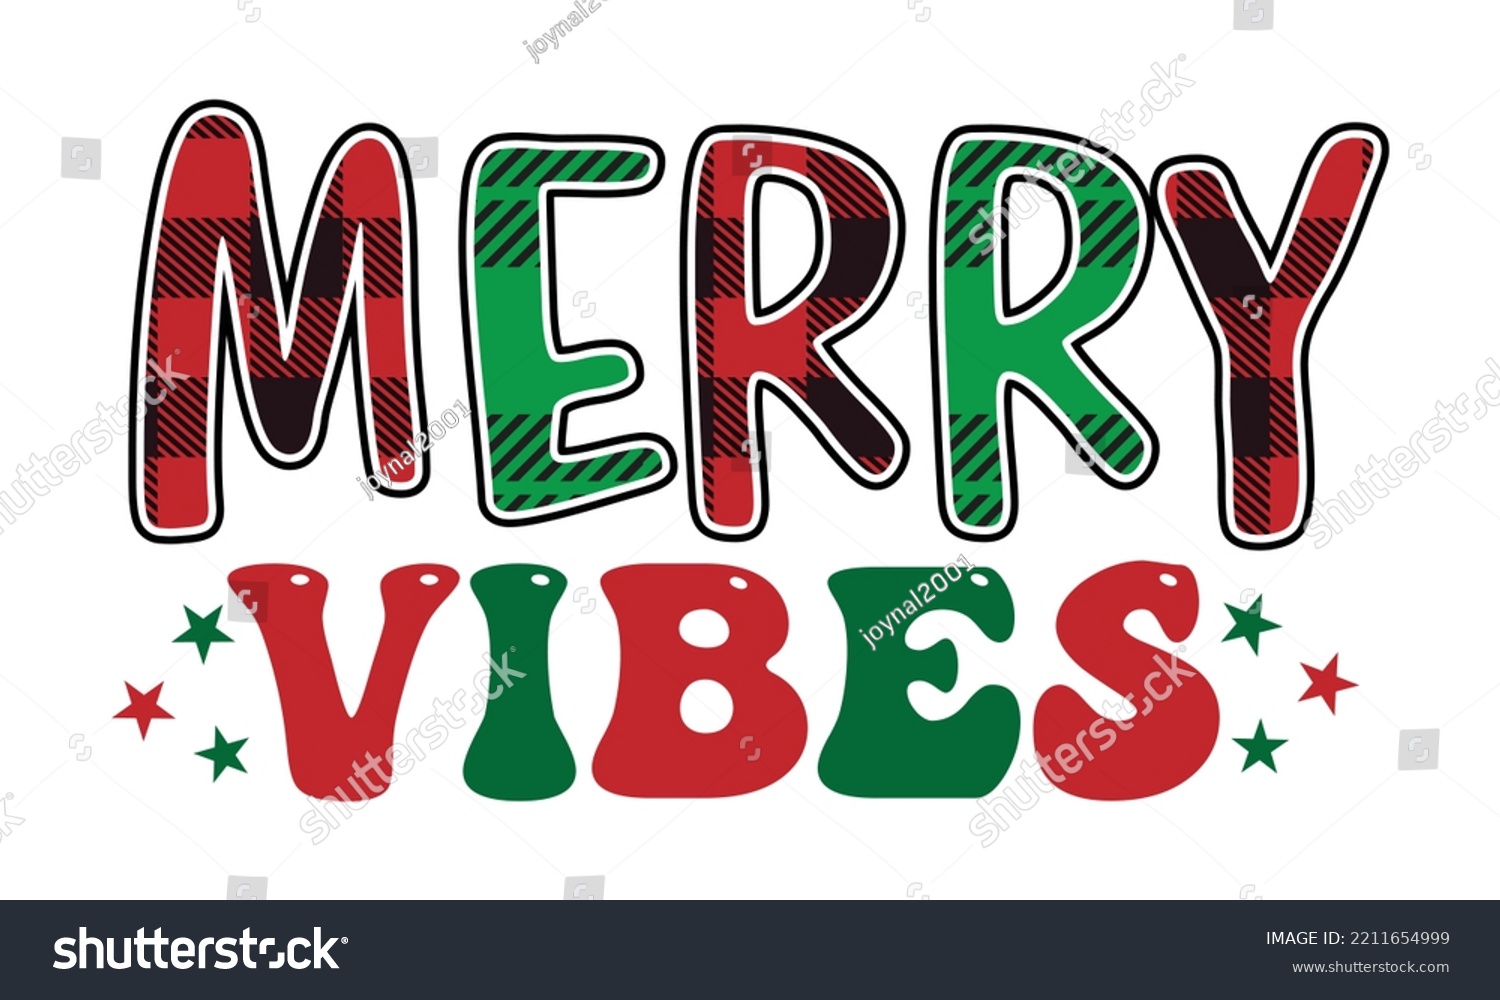 SVG of Christmas Sublimation Quotes SVG Cut Files Designs. Christmas  Stickers quotes SVG cut files, Christmas  Stickers quotes t shirt designs, Saying about Christmas  Stickers . svg